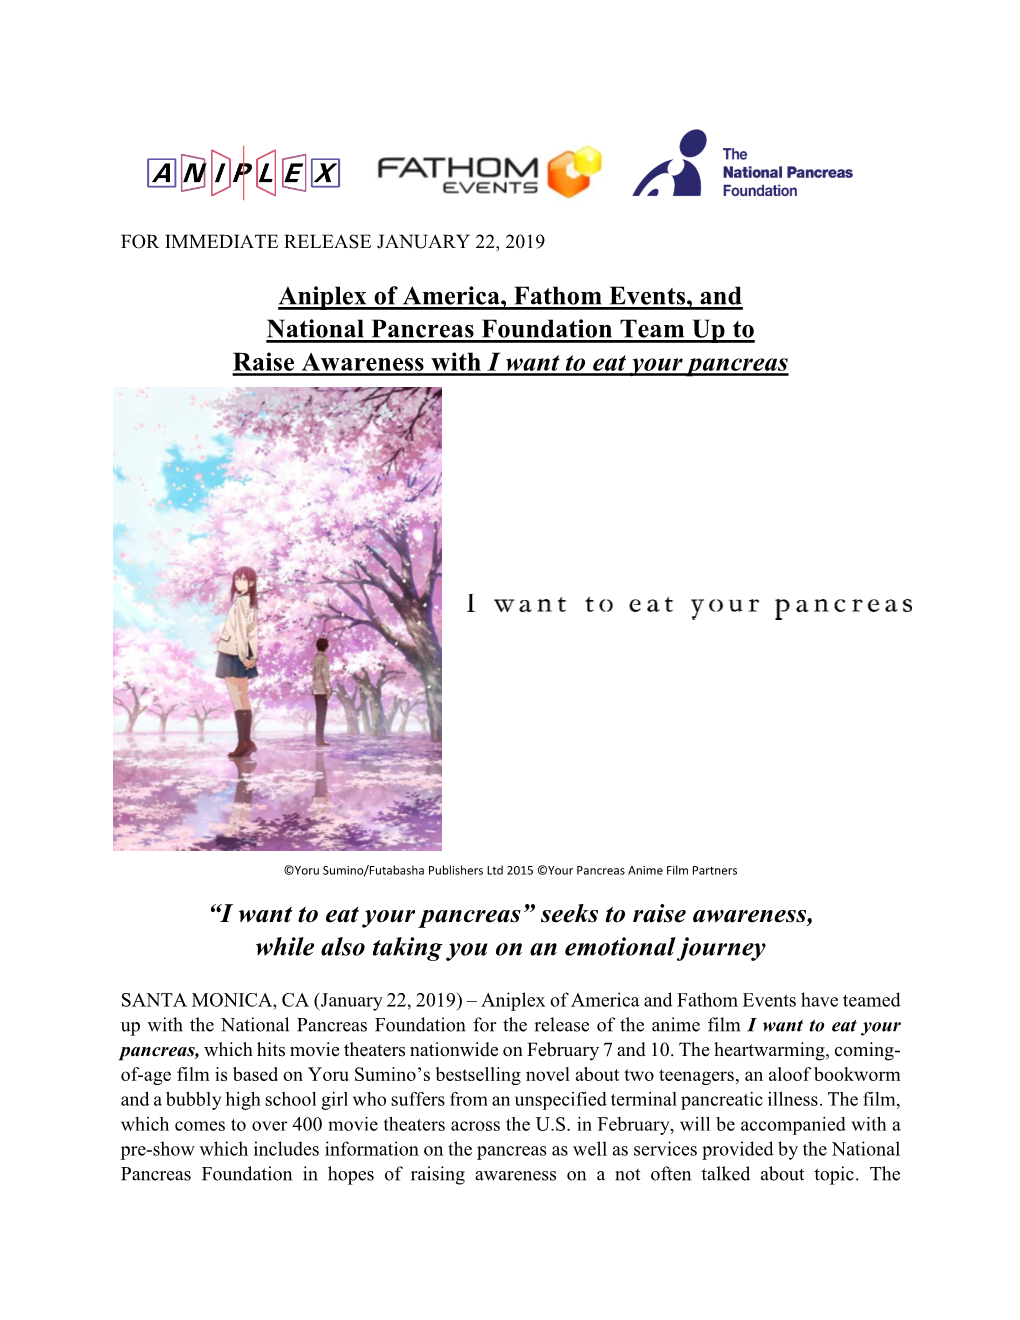 Aniplex of America, Fathom Events, and National Pancreas Foundation Team up to Raise Awareness with I Want to Eat Your Pancreas